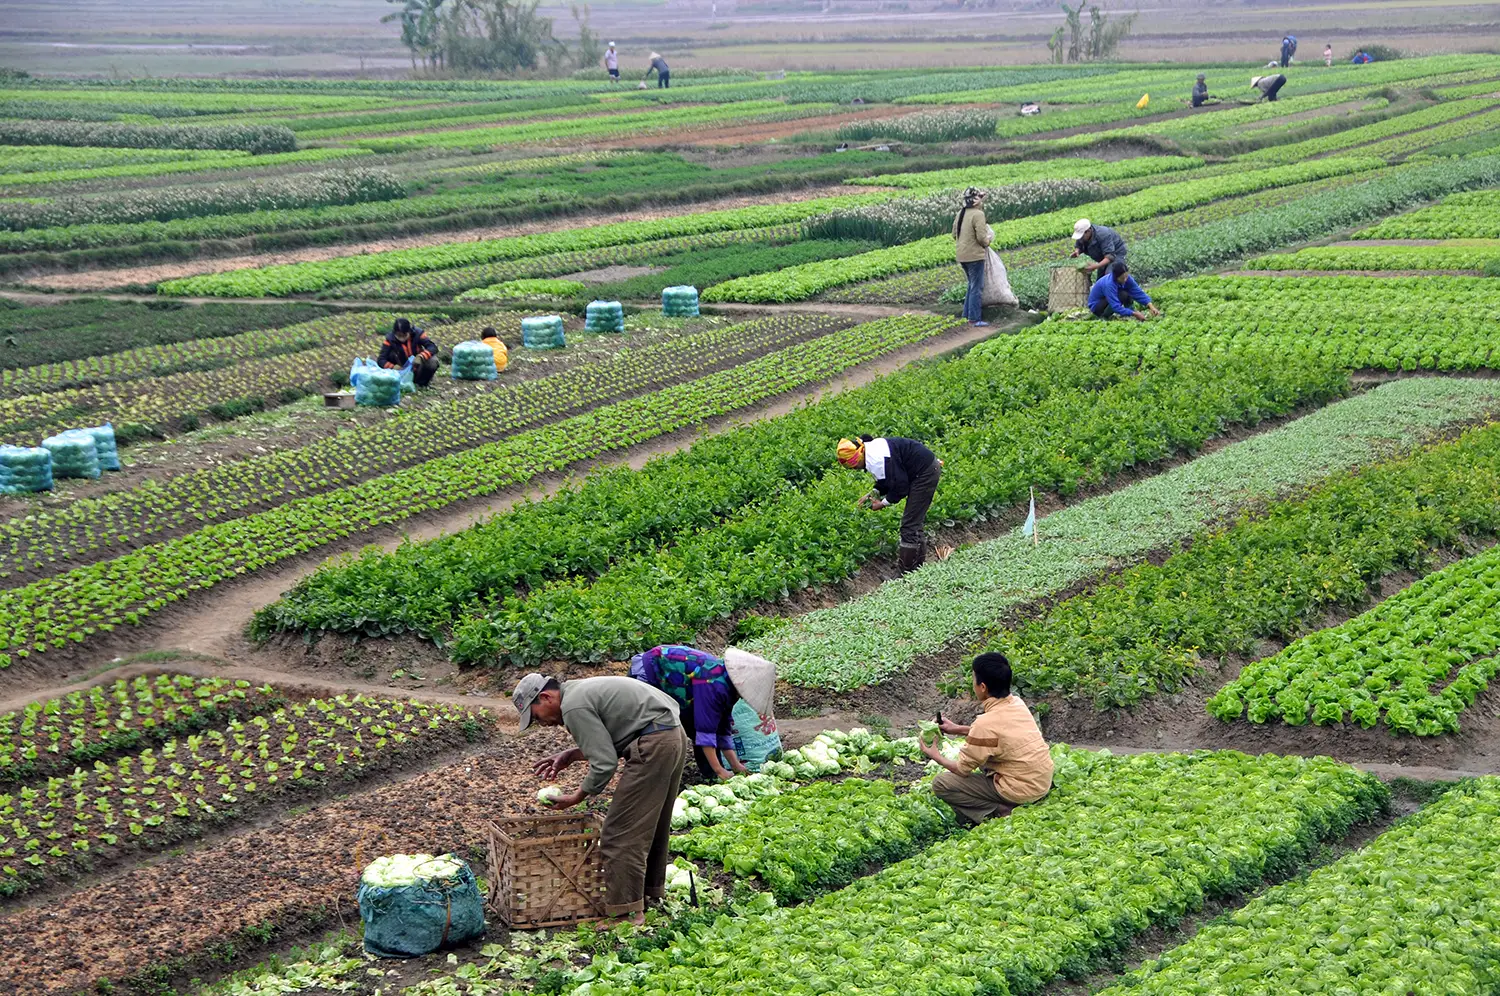 Landscape divided into small plots of various vegetables, around which men and women are bent over, working the land.